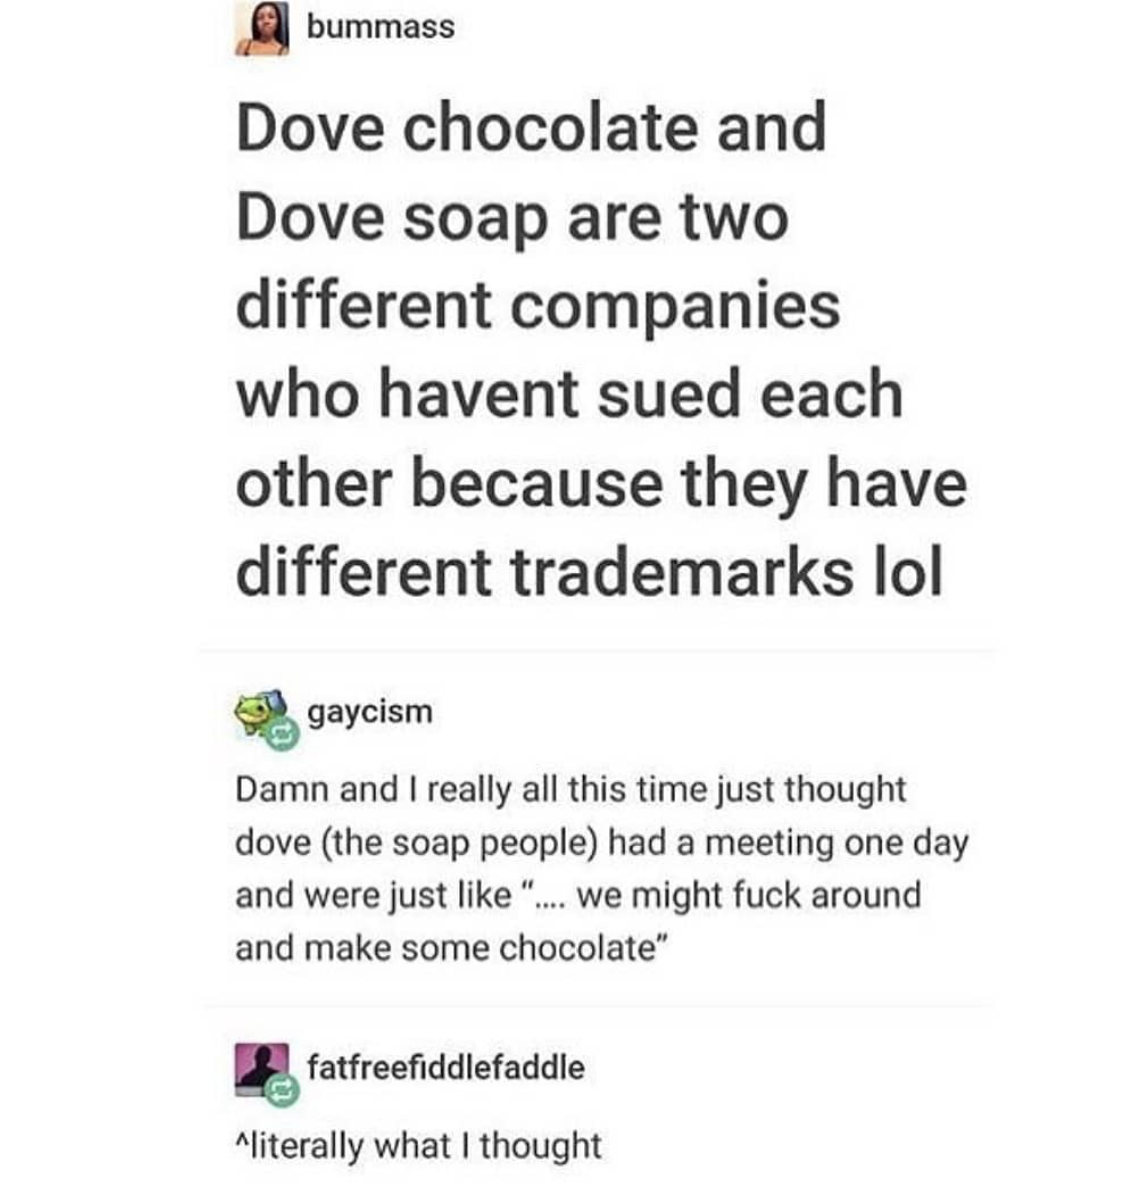 document - bummass Dove chocolate and Dove soap are two different companies who havent sued each other because they have different trademarks lol gaycism Damn and I really all this time just thought dove the soap people had a meeting one day and were just